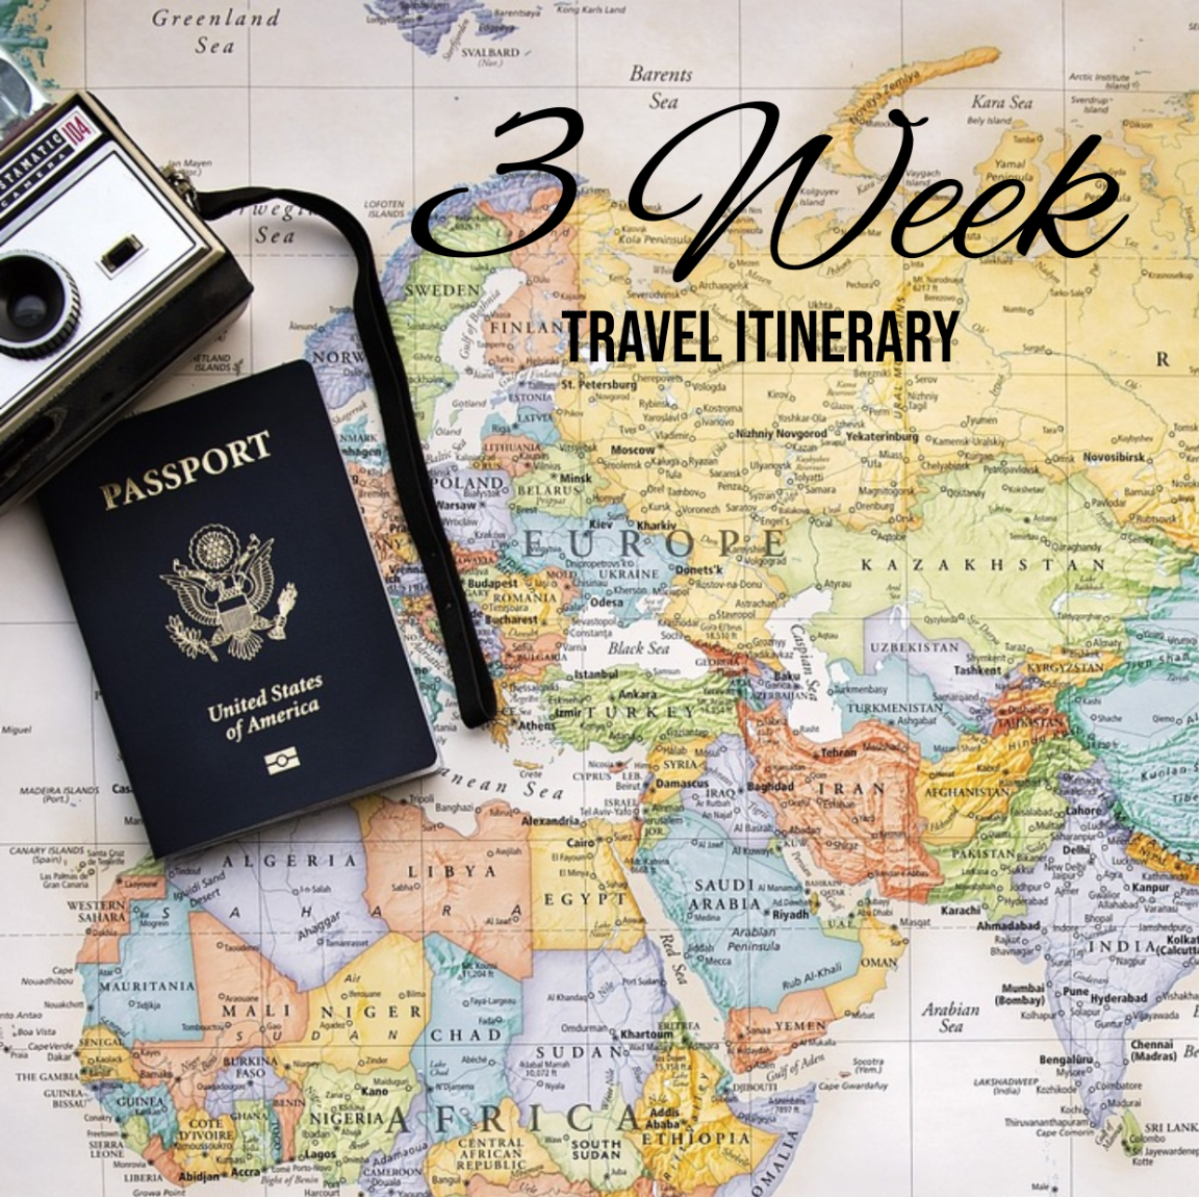 Free 3 Week Travel Itinerary Template